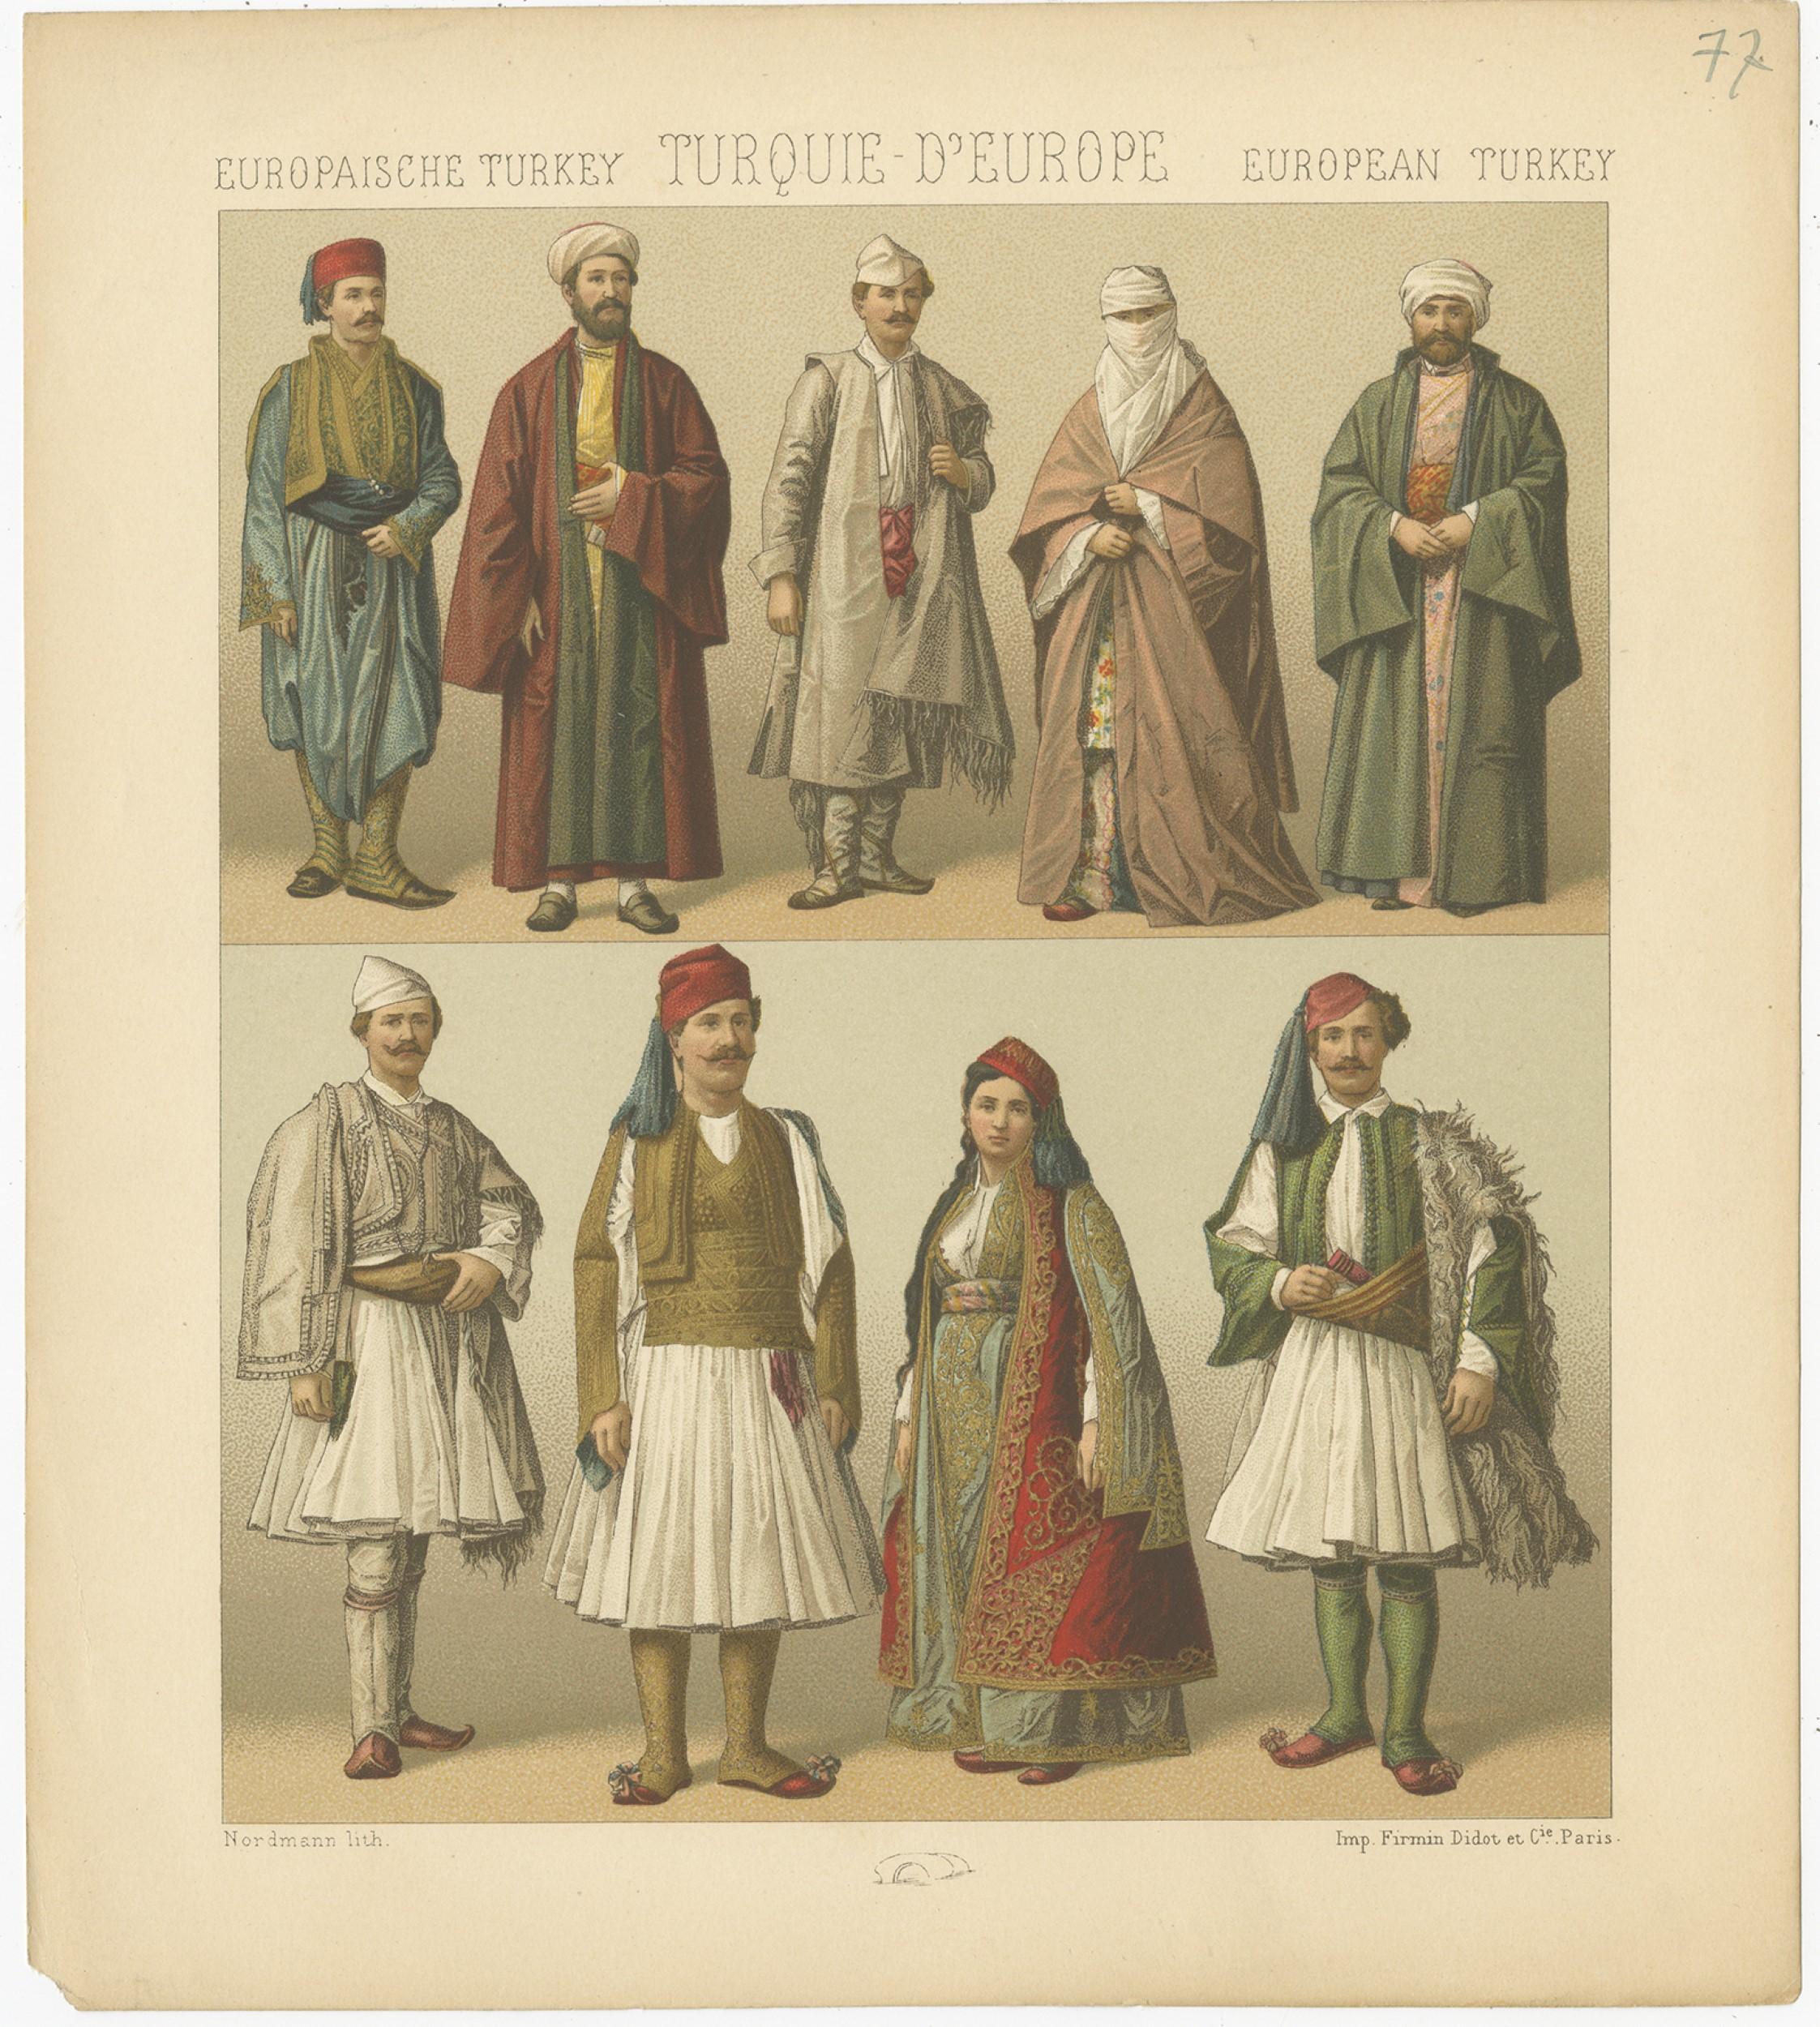 Antique print titled 'Europaische Turkey - Turquie D'Europe - European Turkey'. Chromolithograph of European Turkish Costumes. This print originates from 'Le Costume Historique' by M.A. Racinet. Published, circa 1880.